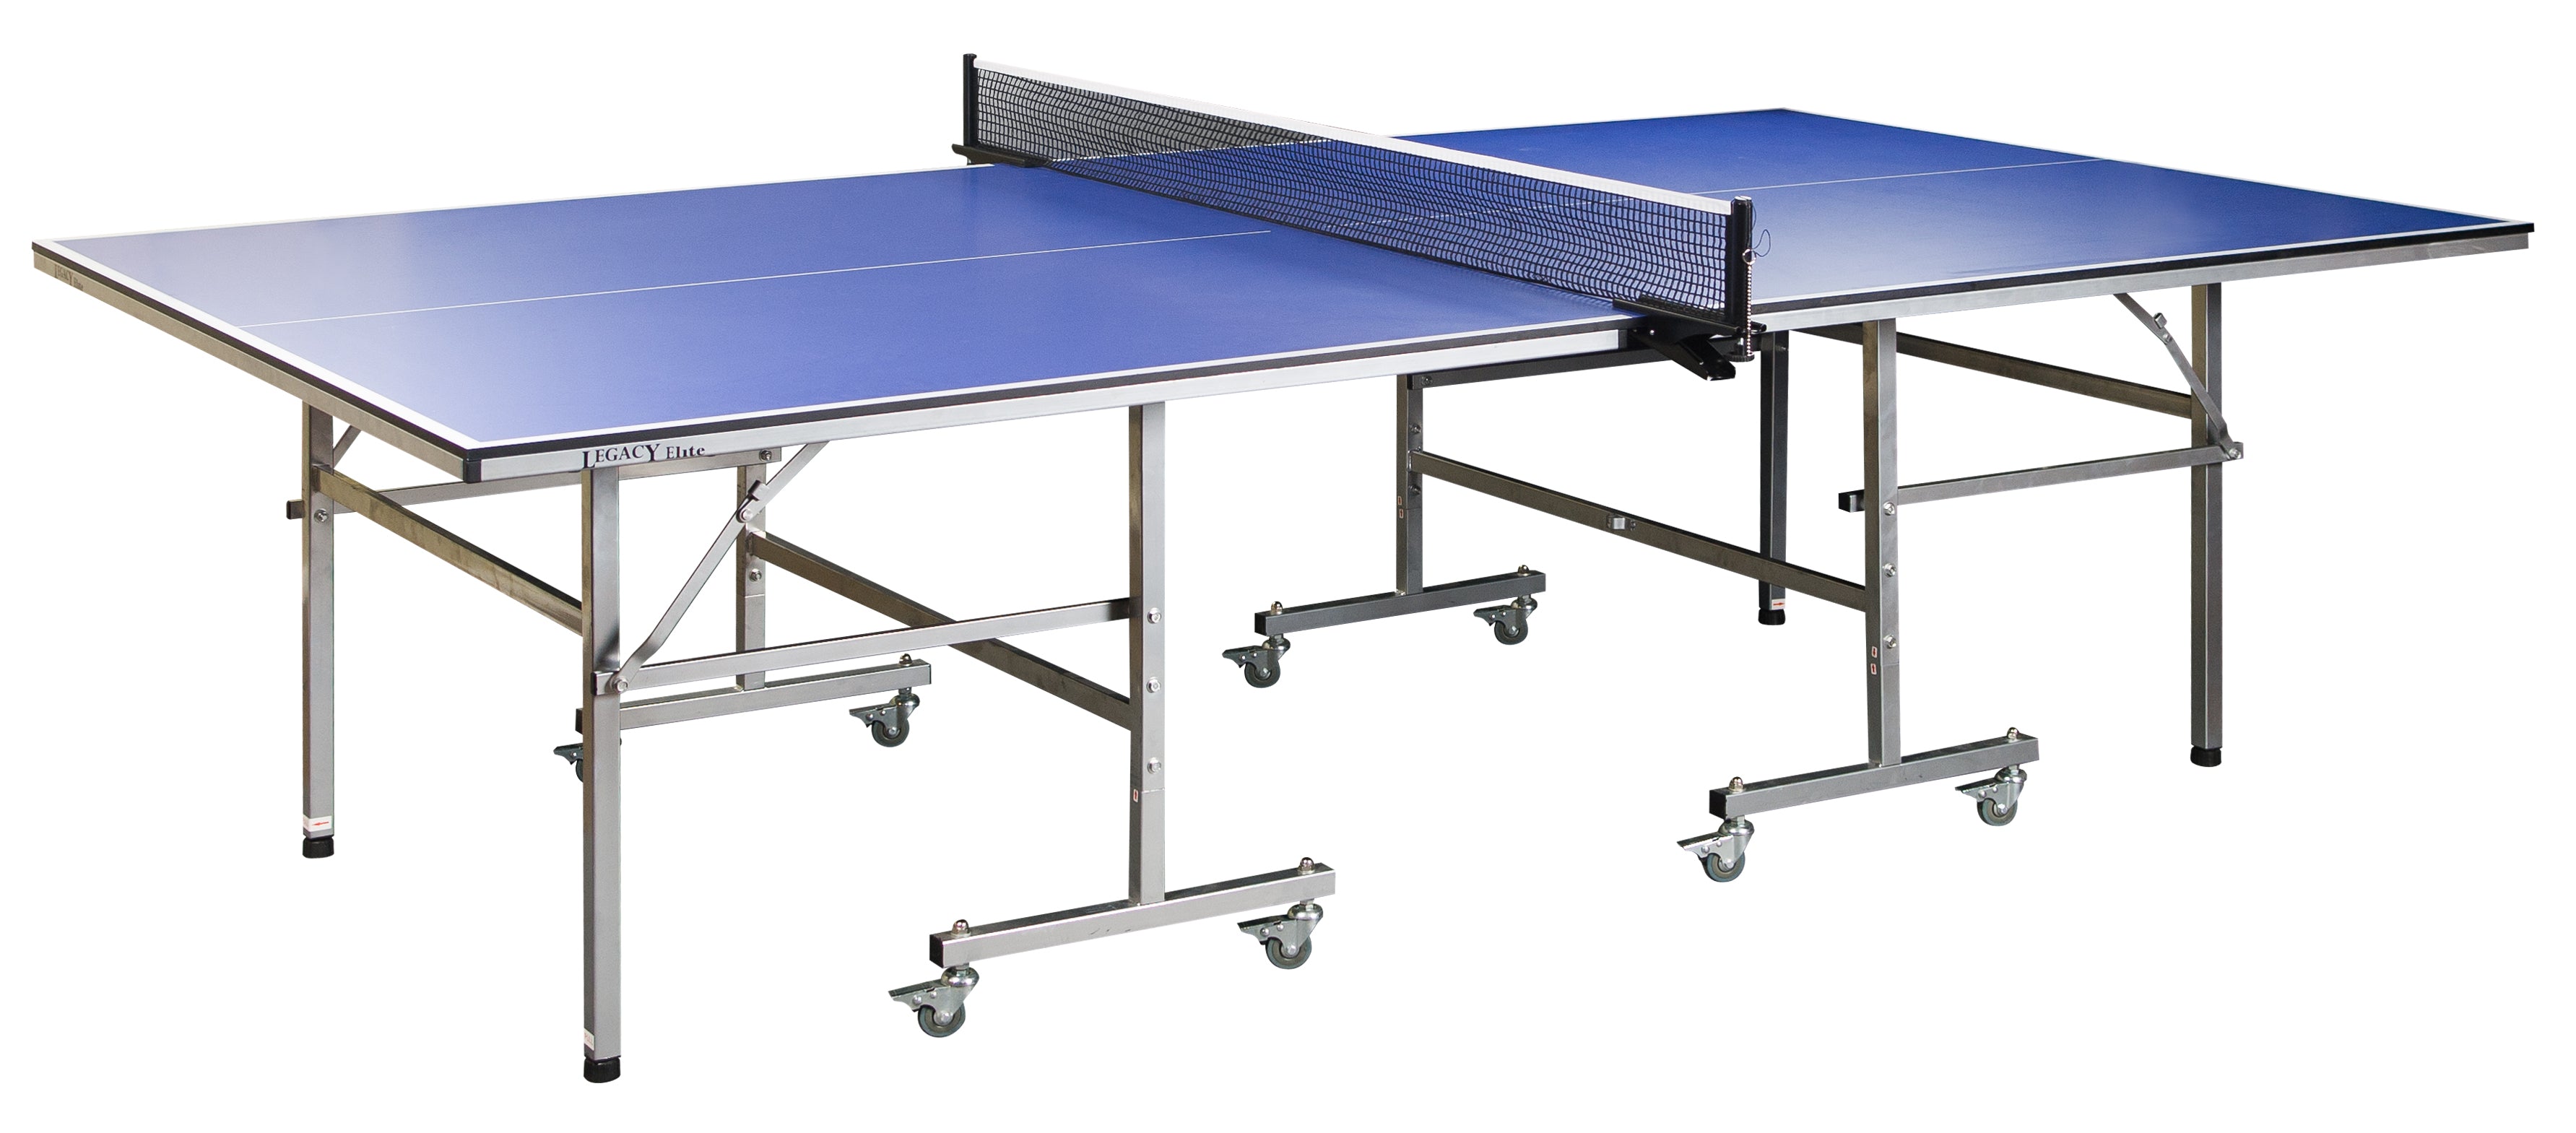 Ping Pong Tables & Table Tennis Tables - Sears